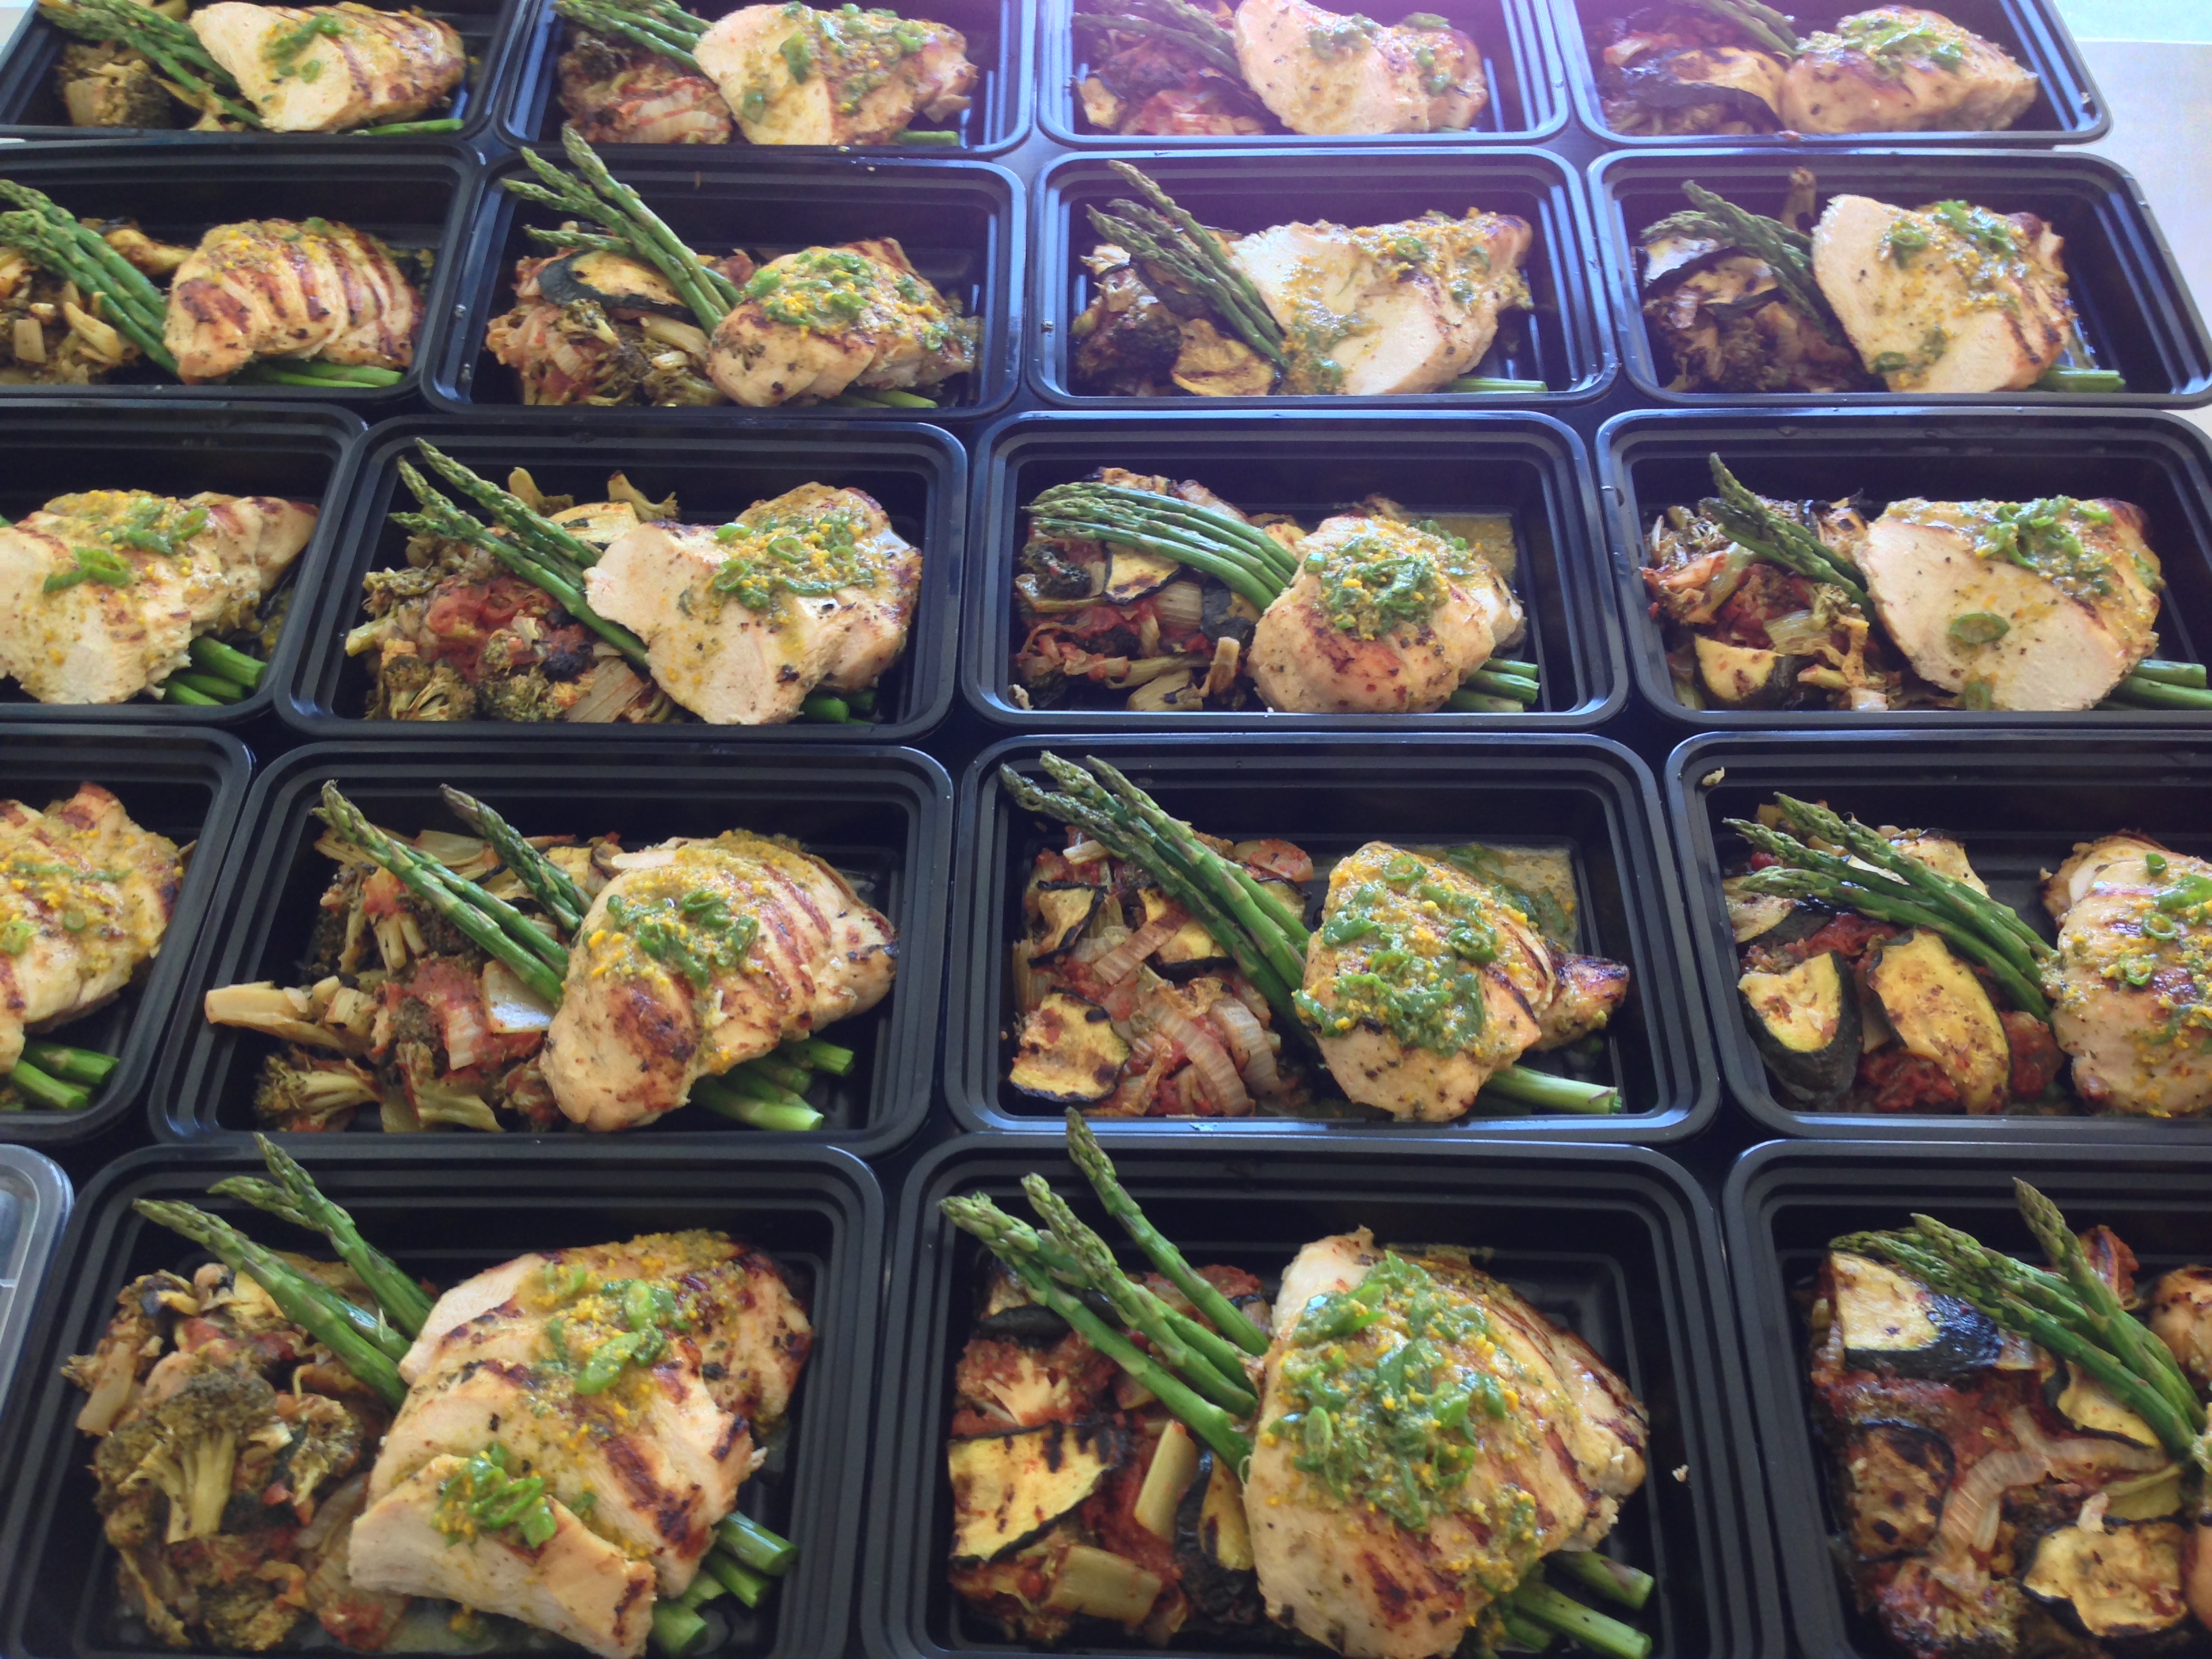 Los Angeles Personal Chef Meal Prep Services, Home Based